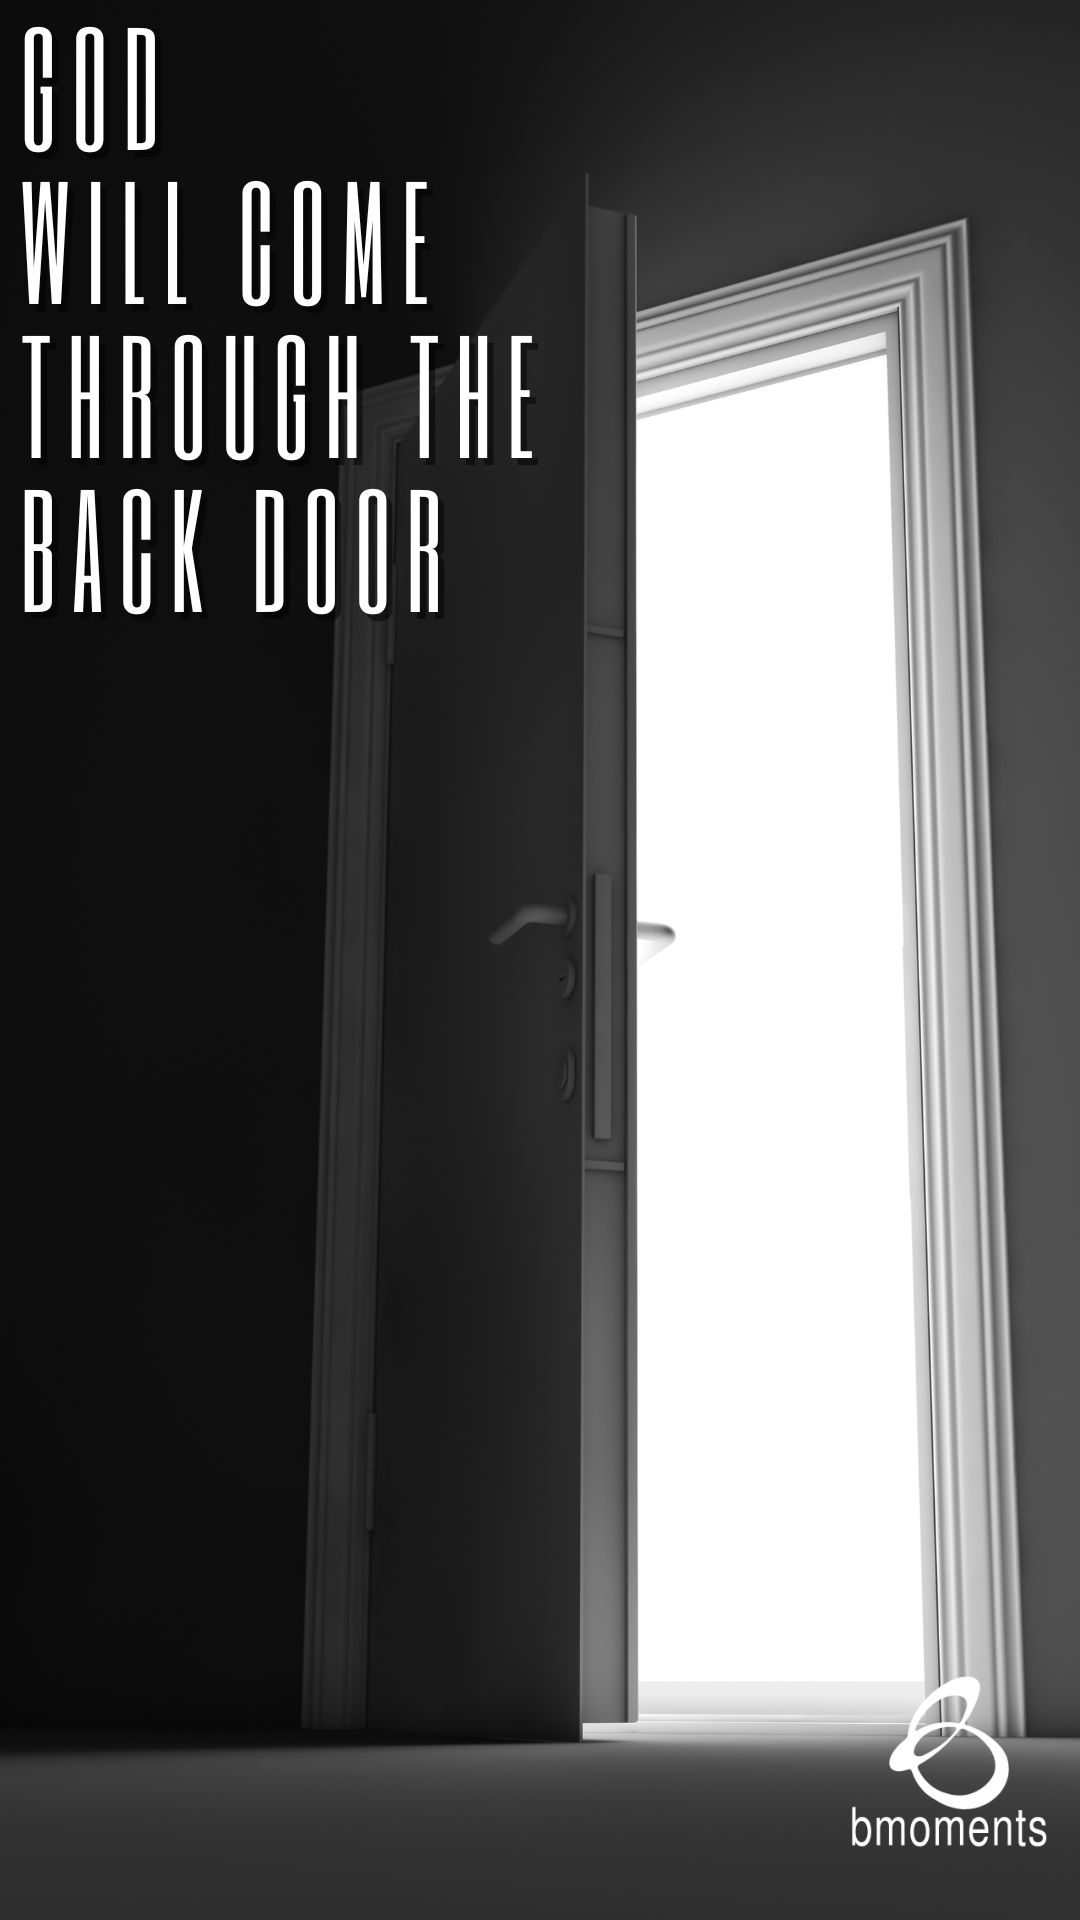 God Will Come Through the Back Door